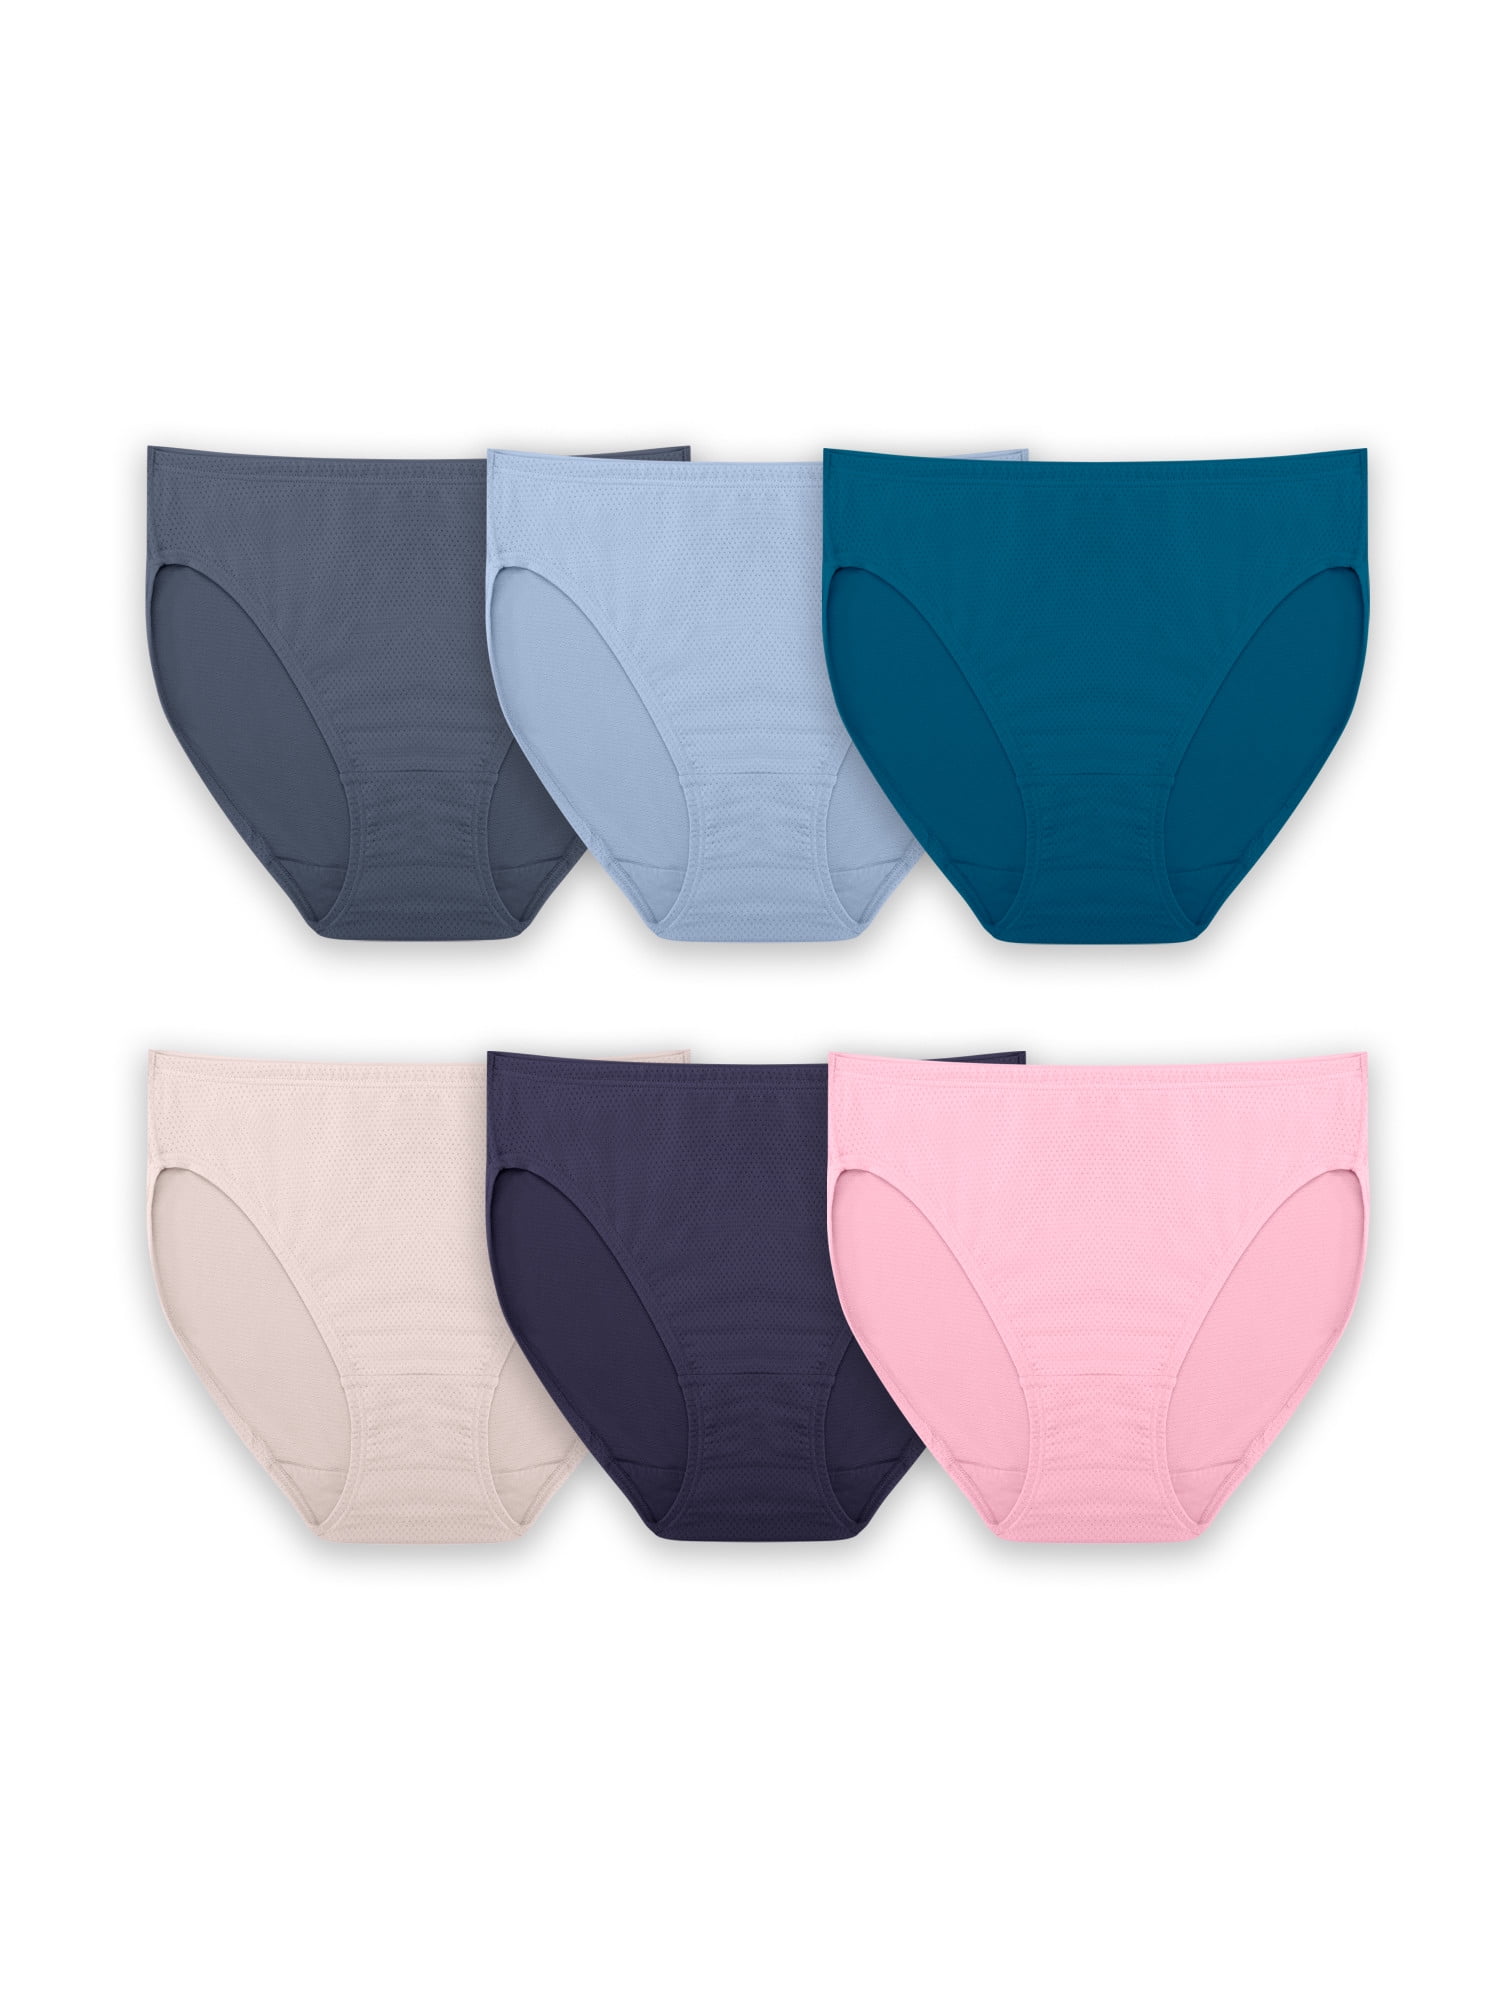 Girls 6-16 Fruit of the Loom® 5-pack Signature Breathable Micro-Mesh  Hipster Panties